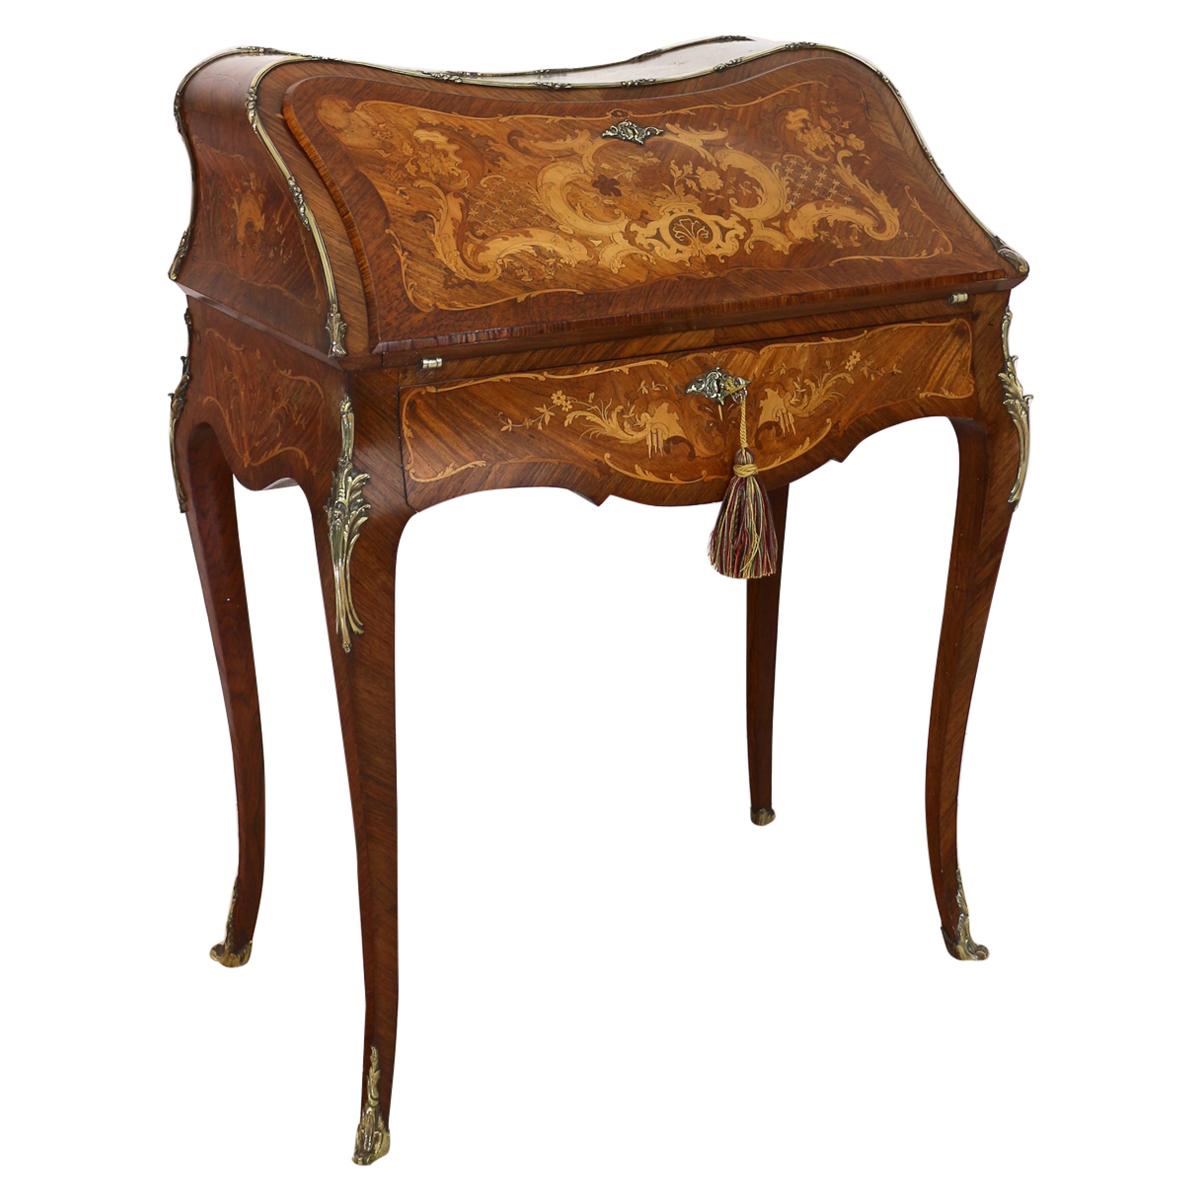 Antique French Louis XV Style Kingwood and Marquetry Bureau de Dame For Sale